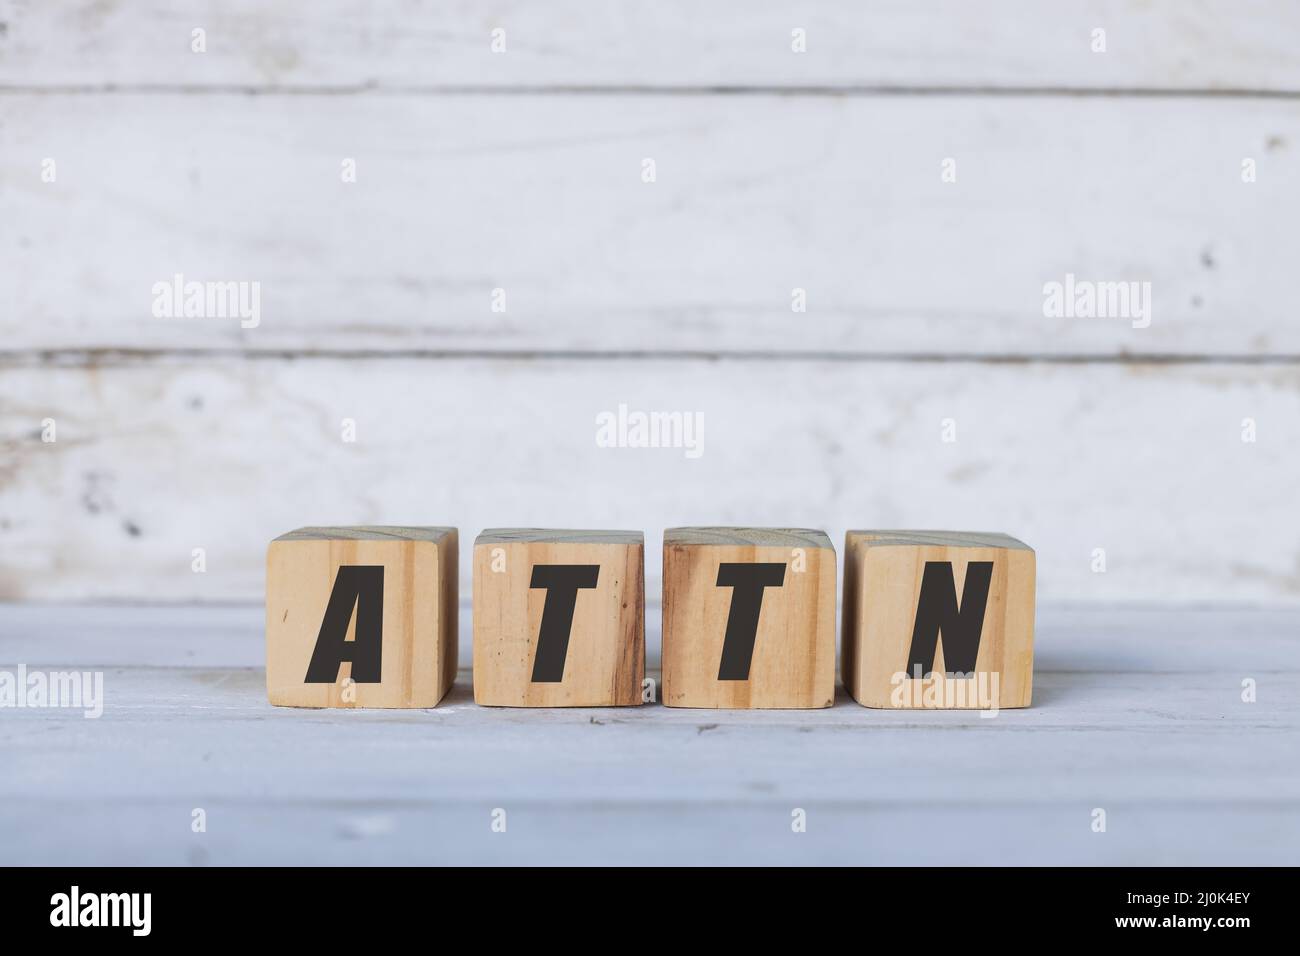 ATTN concept written on wooden cubes or blocks, on white wooden background. Stock Photo